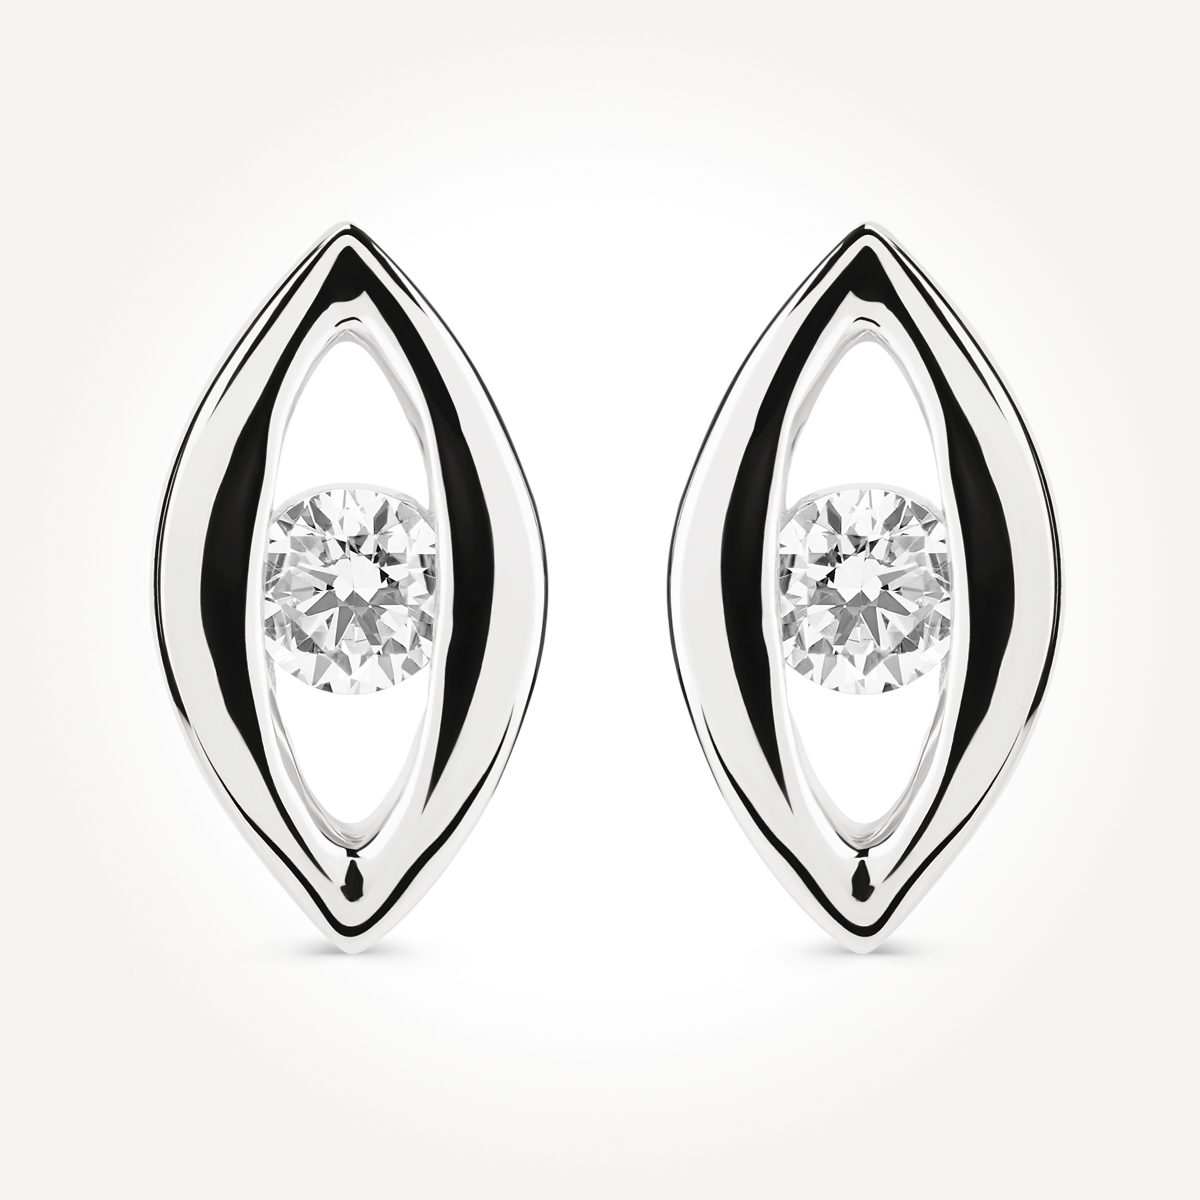 14KT White Gold Marquise Shaped Stud Earrings